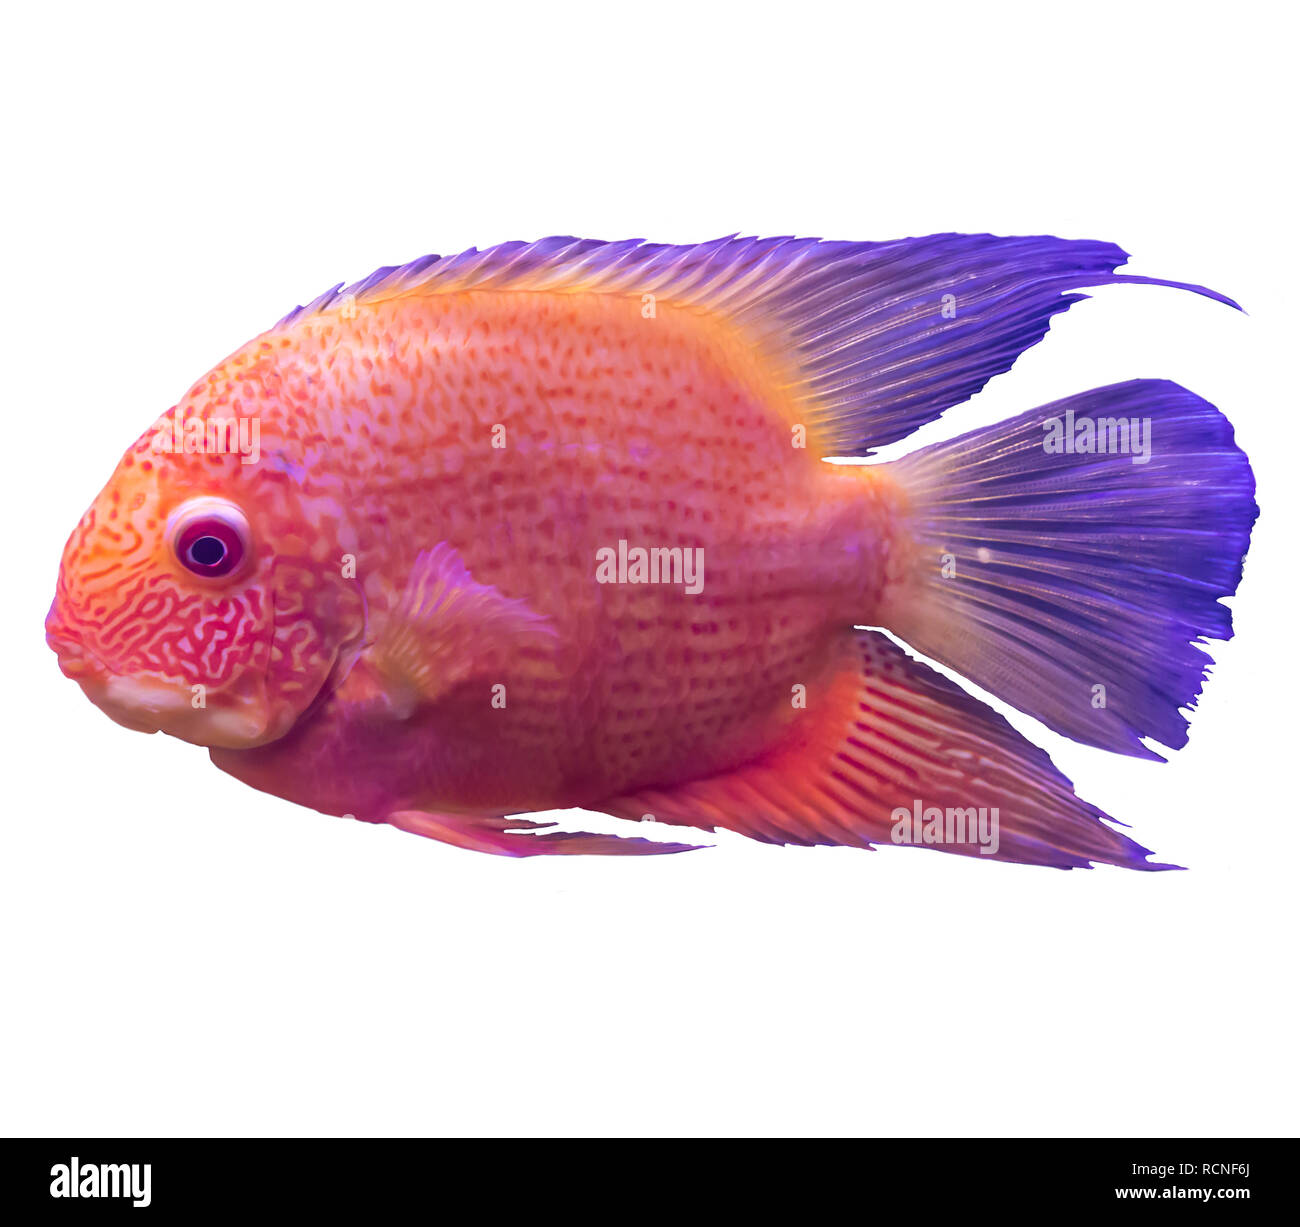 Indian fish Cut Out Stock Images & Pictures - Page 2 - Alamy